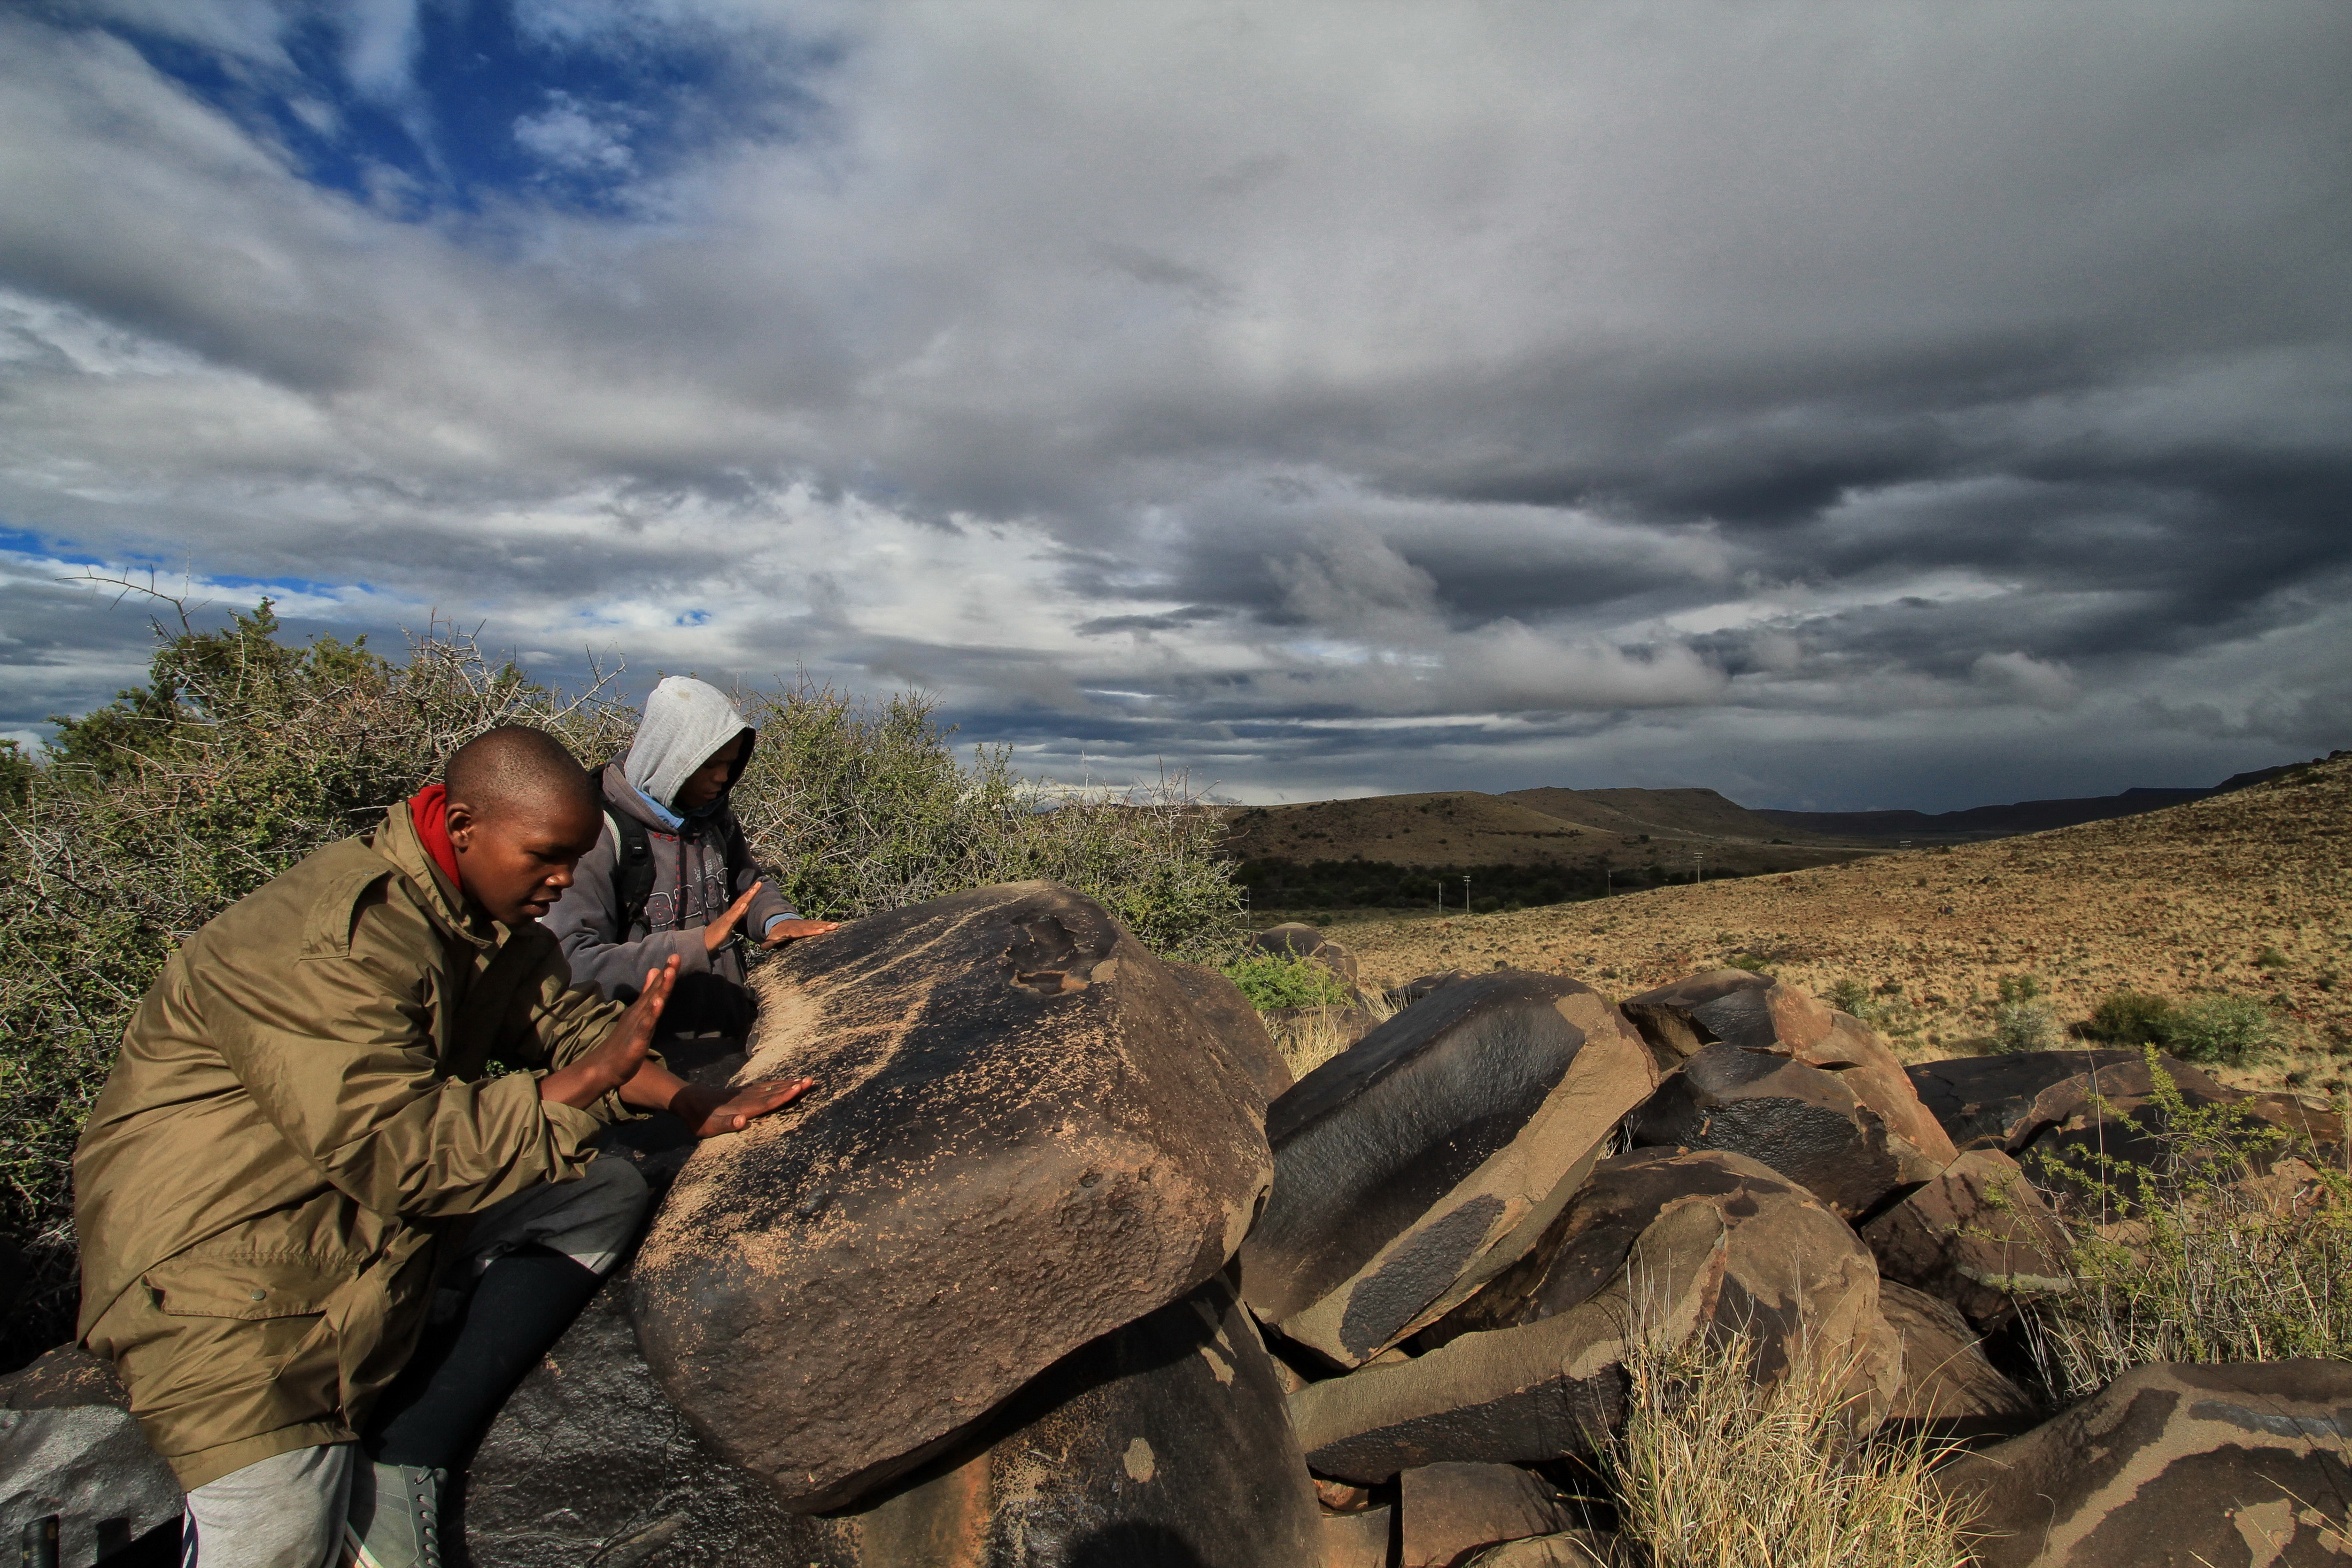 Drumming session – Elrico Adams and Shaun Gentels beating on a gong rock on the heights above Nelspoort. Image: Chris Marais